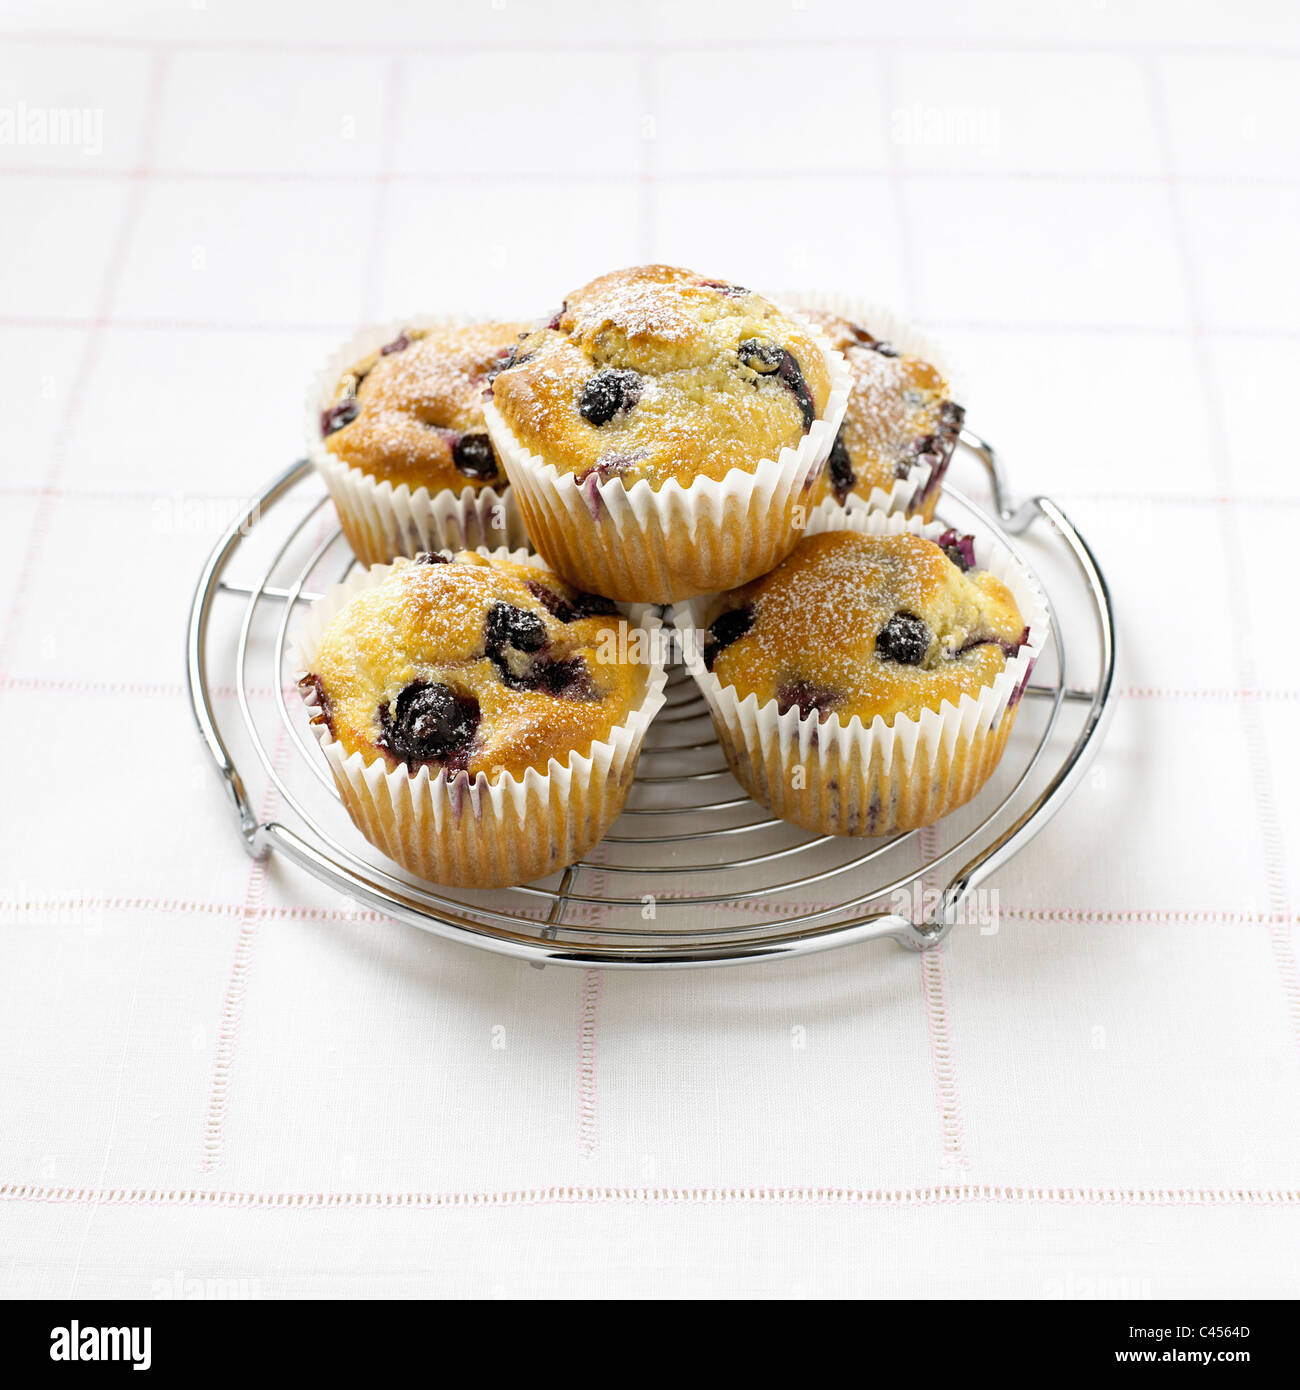 Blueberry muffins on cooling rack, close-up Stock Photo